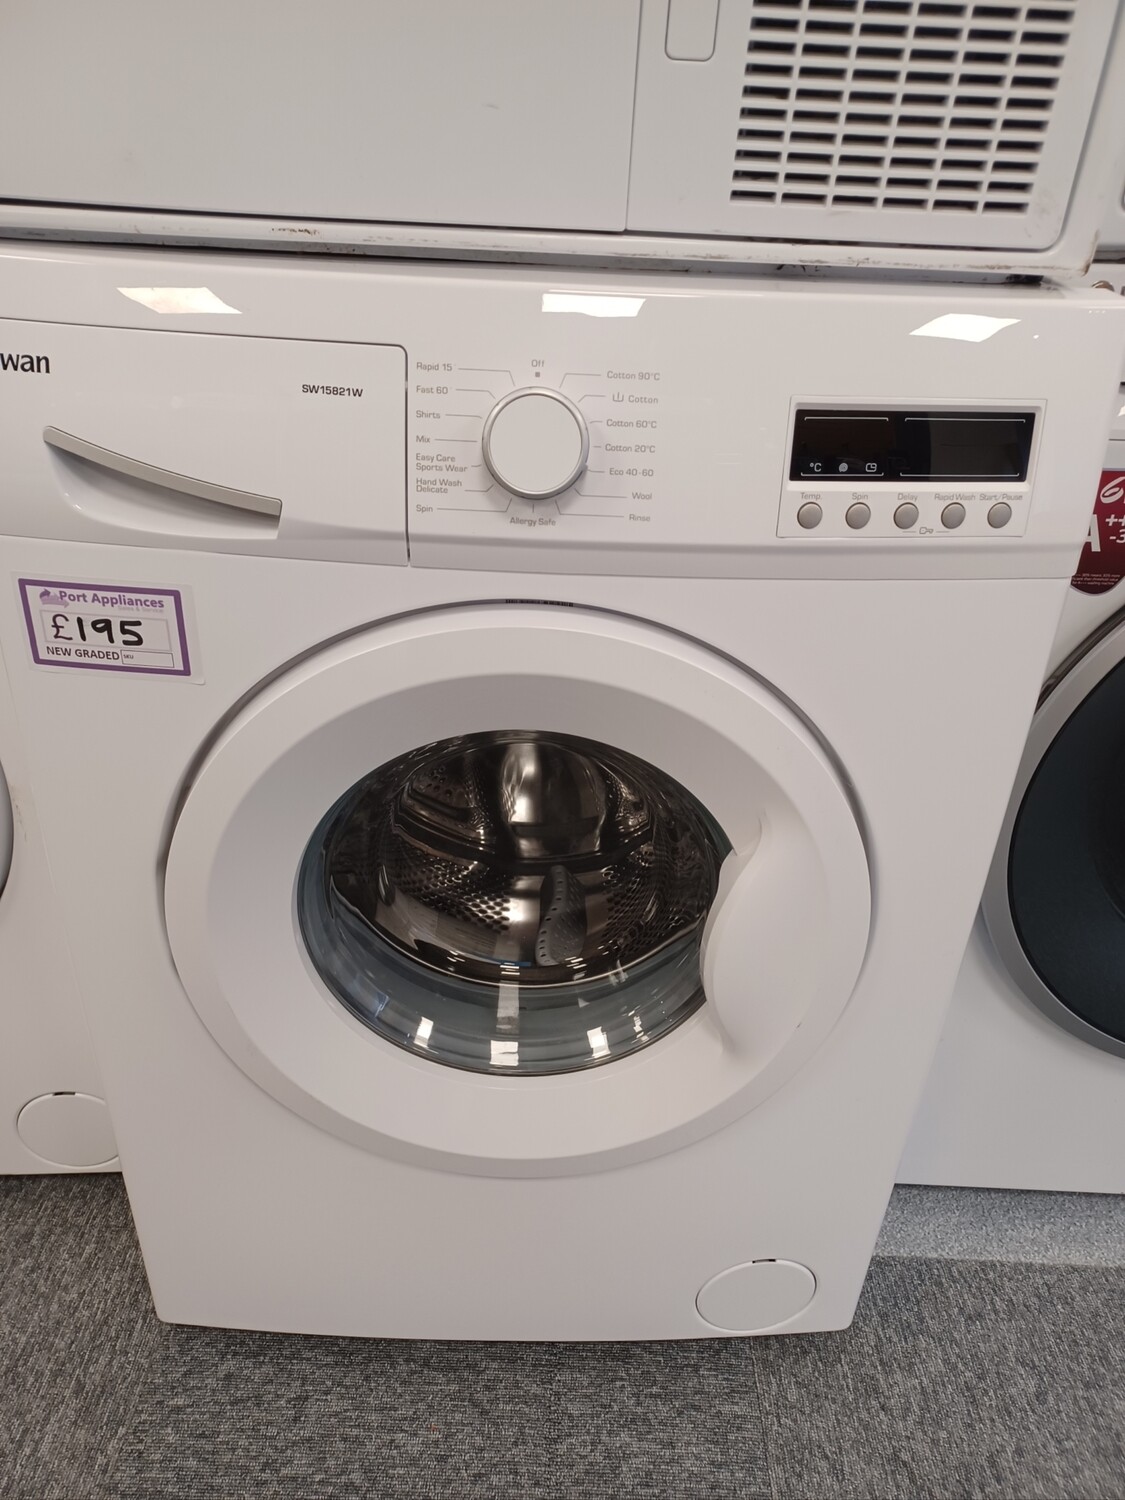 Swan SW15821W 7kg Load, 1200 Spin Washing Machine - White - Brand New Boxed + 1 Year Guarantee